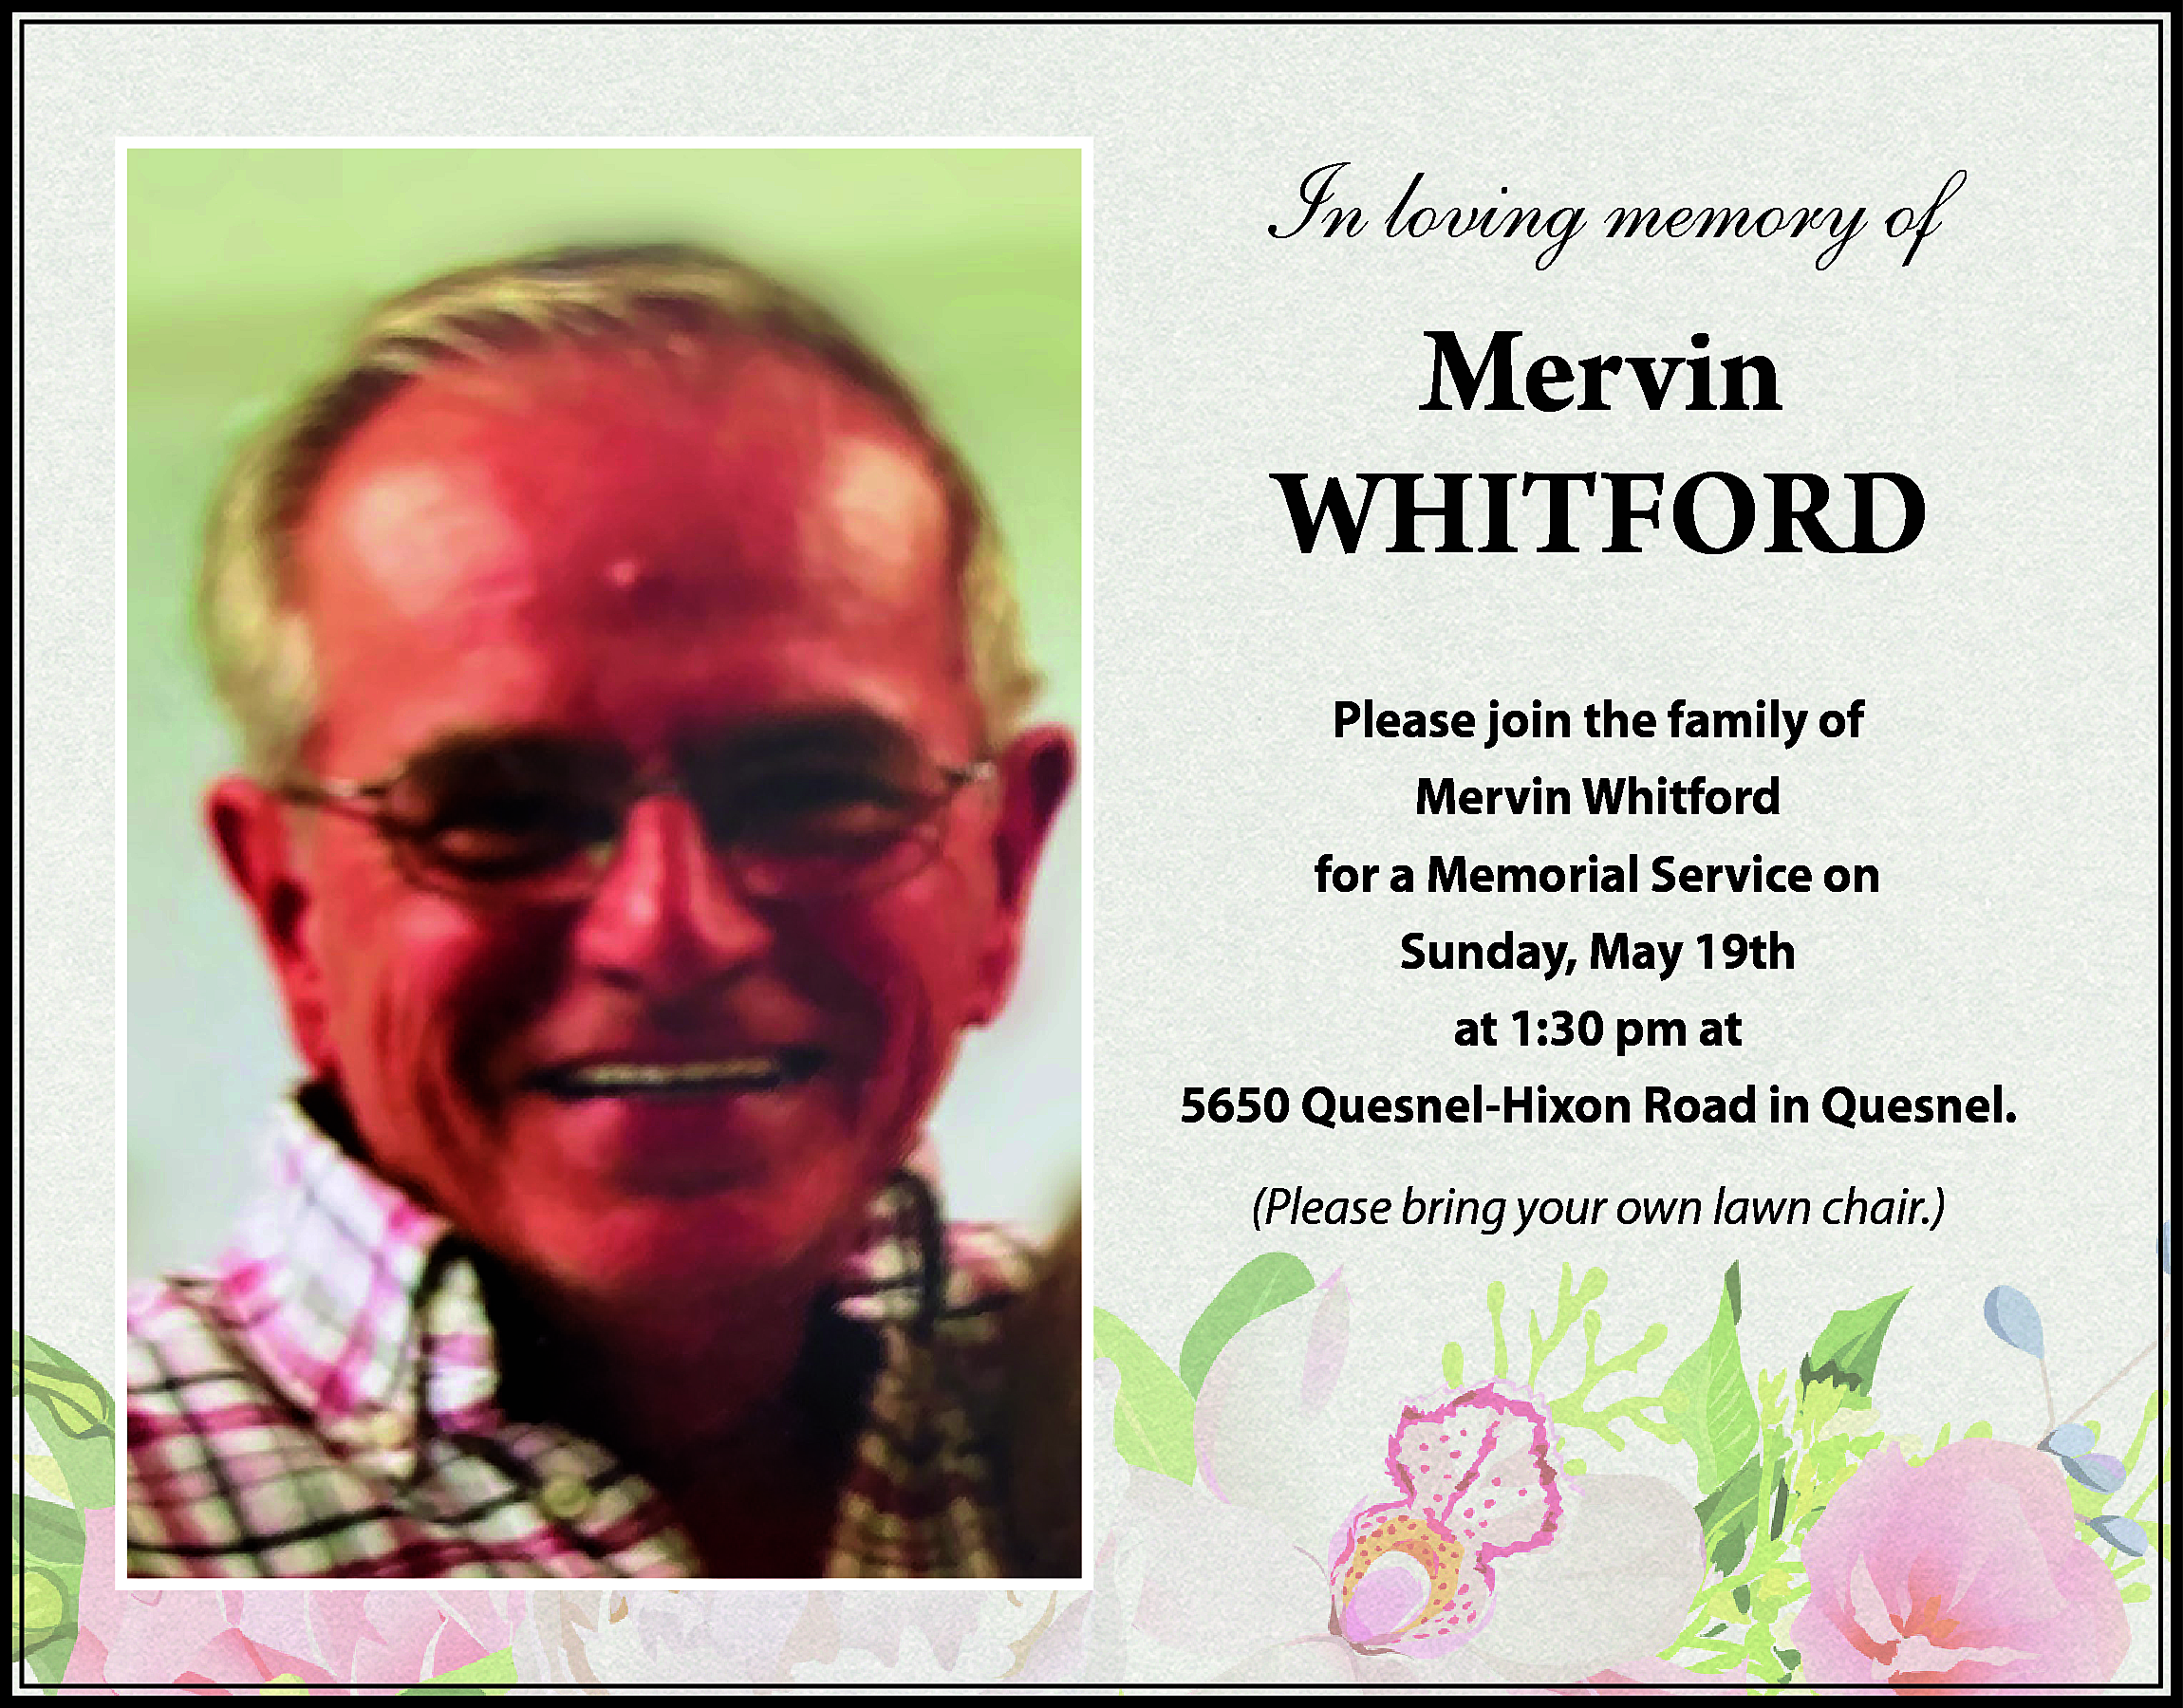 In loving memory of <br>  In loving memory of    Mervin  WHITFORD  Please join the family of  Mervin Whitford  for a Memorial Service on  Sunday, May 19th  at 1:30 pm at  5650 Quesnel-Hixon Road in Quesnel.  (Please bring your own lawn chair.)    